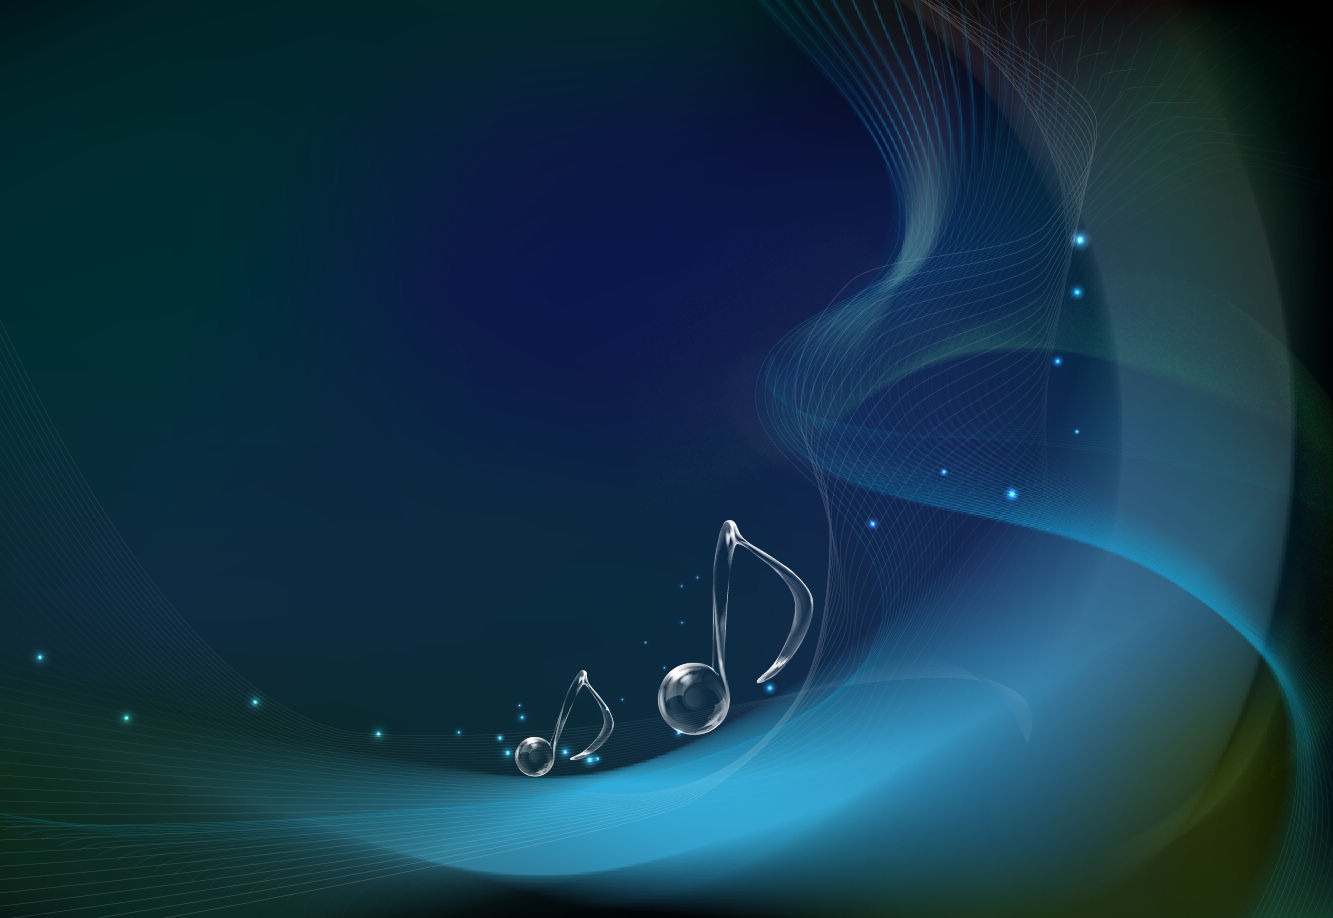 free clipart music backgrounds - photo #14